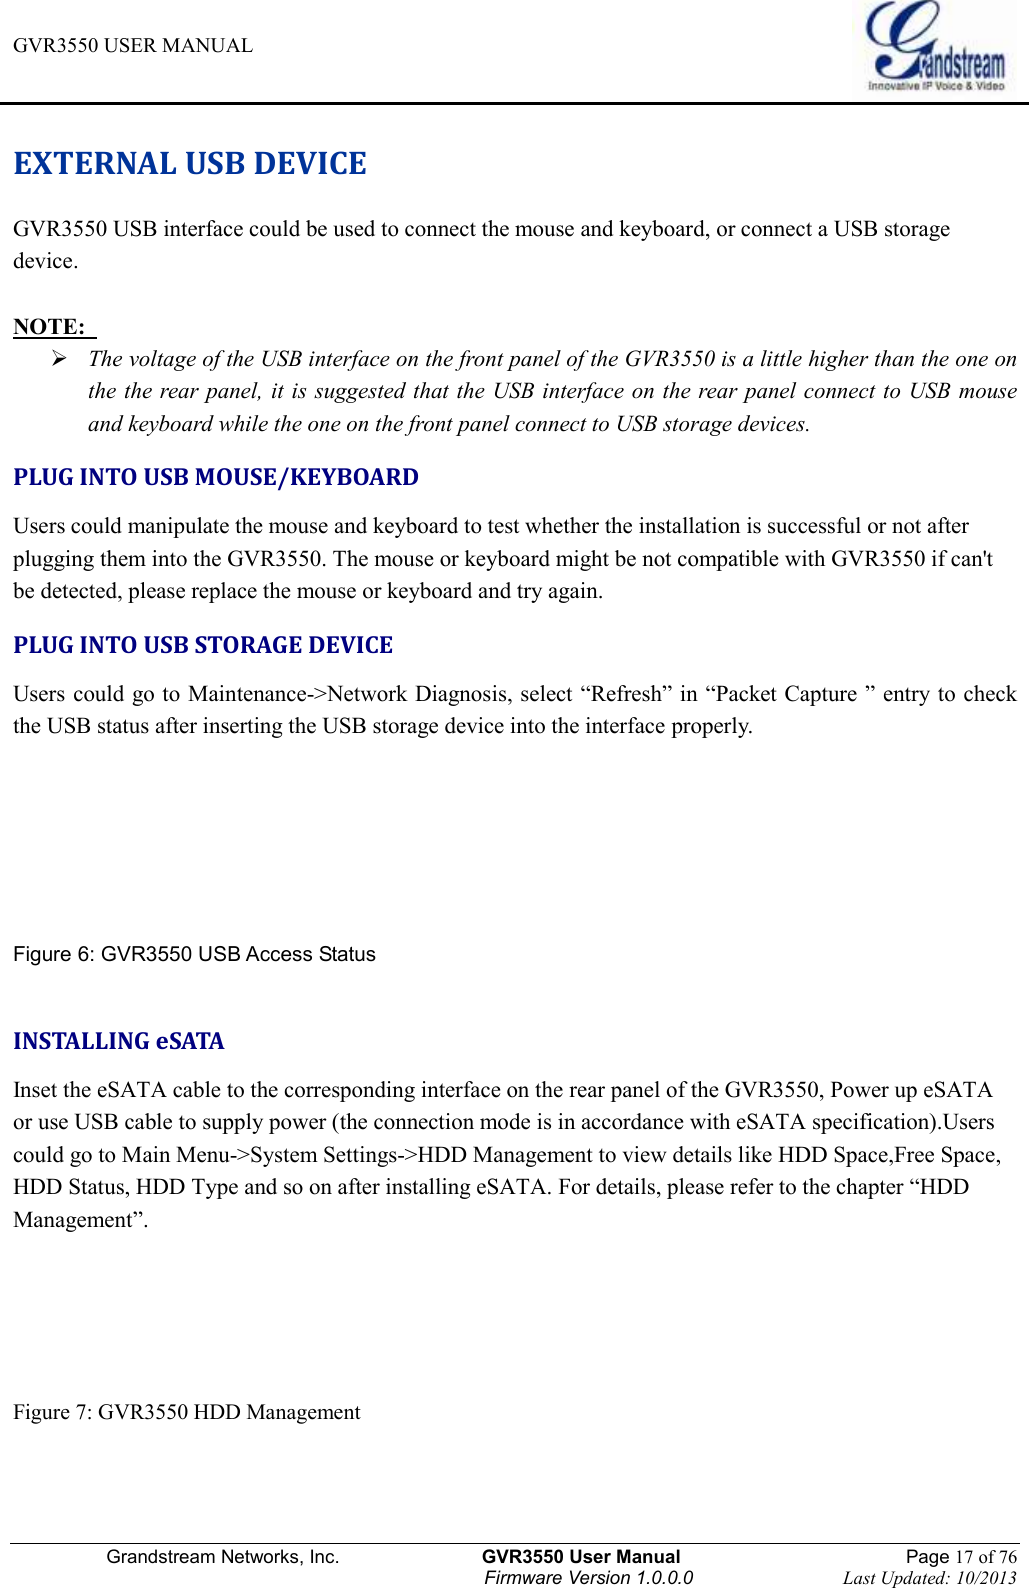 GVR3550 USER MANUAL   Grandstream Networks, Inc.                    GVR3550 User Manual                                                Page 17 of 76 Firmware Version 1.0.0.0                                Last Updated: 10/2013  EXTERNAL USB DEVICE GVR3550 USB interface could be used to connect the mouse and keyboard, or connect a USB storage device.  NOTE:    The voltage of the USB interface on the front panel of the GVR3550 is a little higher than the one on the the rear panel, it is suggested that the USB interface on the rear panel connect to USB mouse and keyboard while the one on the front panel connect to USB storage devices. PLUG INTO USB MOUSE/KEYBOARD Users could manipulate the mouse and keyboard to test whether the installation is successful or not after plugging them into the GVR3550. The mouse or keyboard might be not compatible with GVR3550 if can&apos;t be detected, please replace the mouse or keyboard and try again. PLUG INTO USB STORAGE DEVICE Users could go to Maintenance-&gt;Network Diagnosis, select “Refresh” in “Packet Capture ” entry to check the USB status after inserting the USB storage device into the interface properly.     Figure 6: GVR3550 USB Access Status  INSTALLING eSATA Inset the eSATA cable to the corresponding interface on the rear panel of the GVR3550, Power up eSATA or use USB cable to supply power (the connection mode is in accordance with eSATA specification).Users could go to Main Menu-&gt;System Settings-&gt;HDD Management to view details like HDD Space,Free Space, HDD Status, HDD Type and so on after installing eSATA. For details, please refer to the chapter “HDD Management”.    Figure 7: GVR3550 HDD Management    